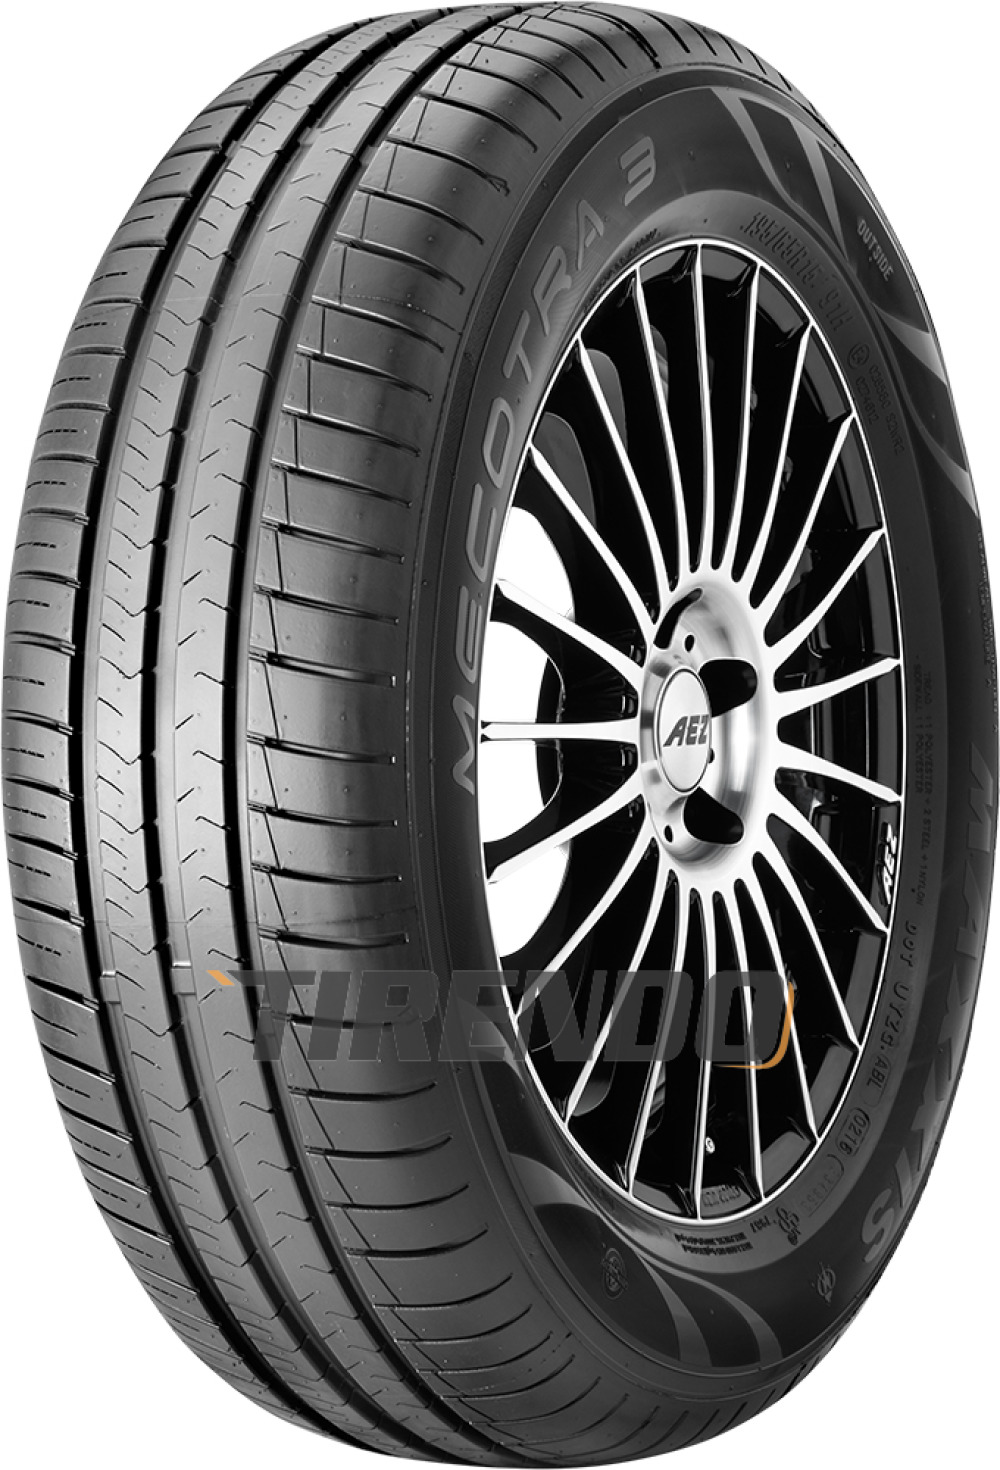 Maxxis Mecotra 3 ( 185/70 R14 88T ) von Maxxis